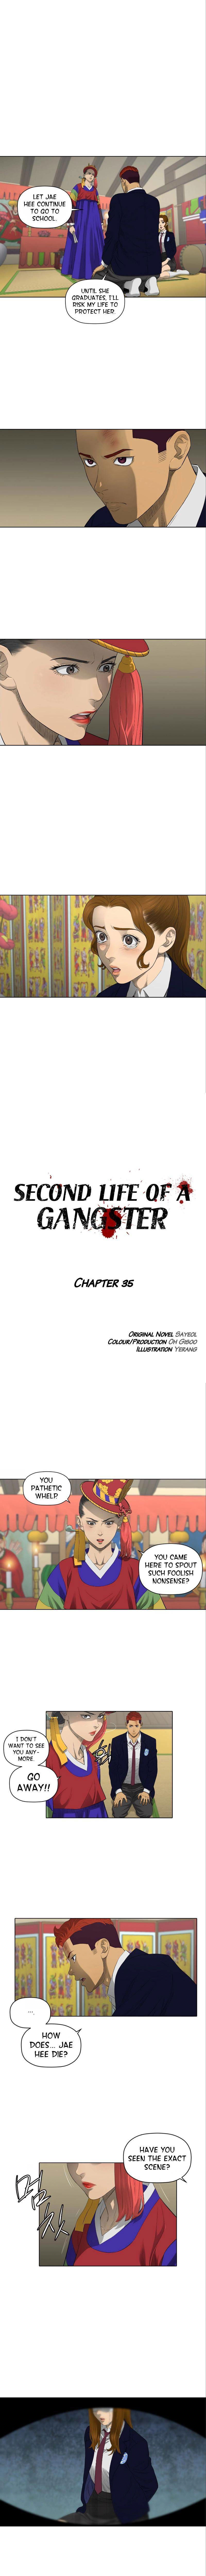 second-life-of-a-gangster-chap-35-1